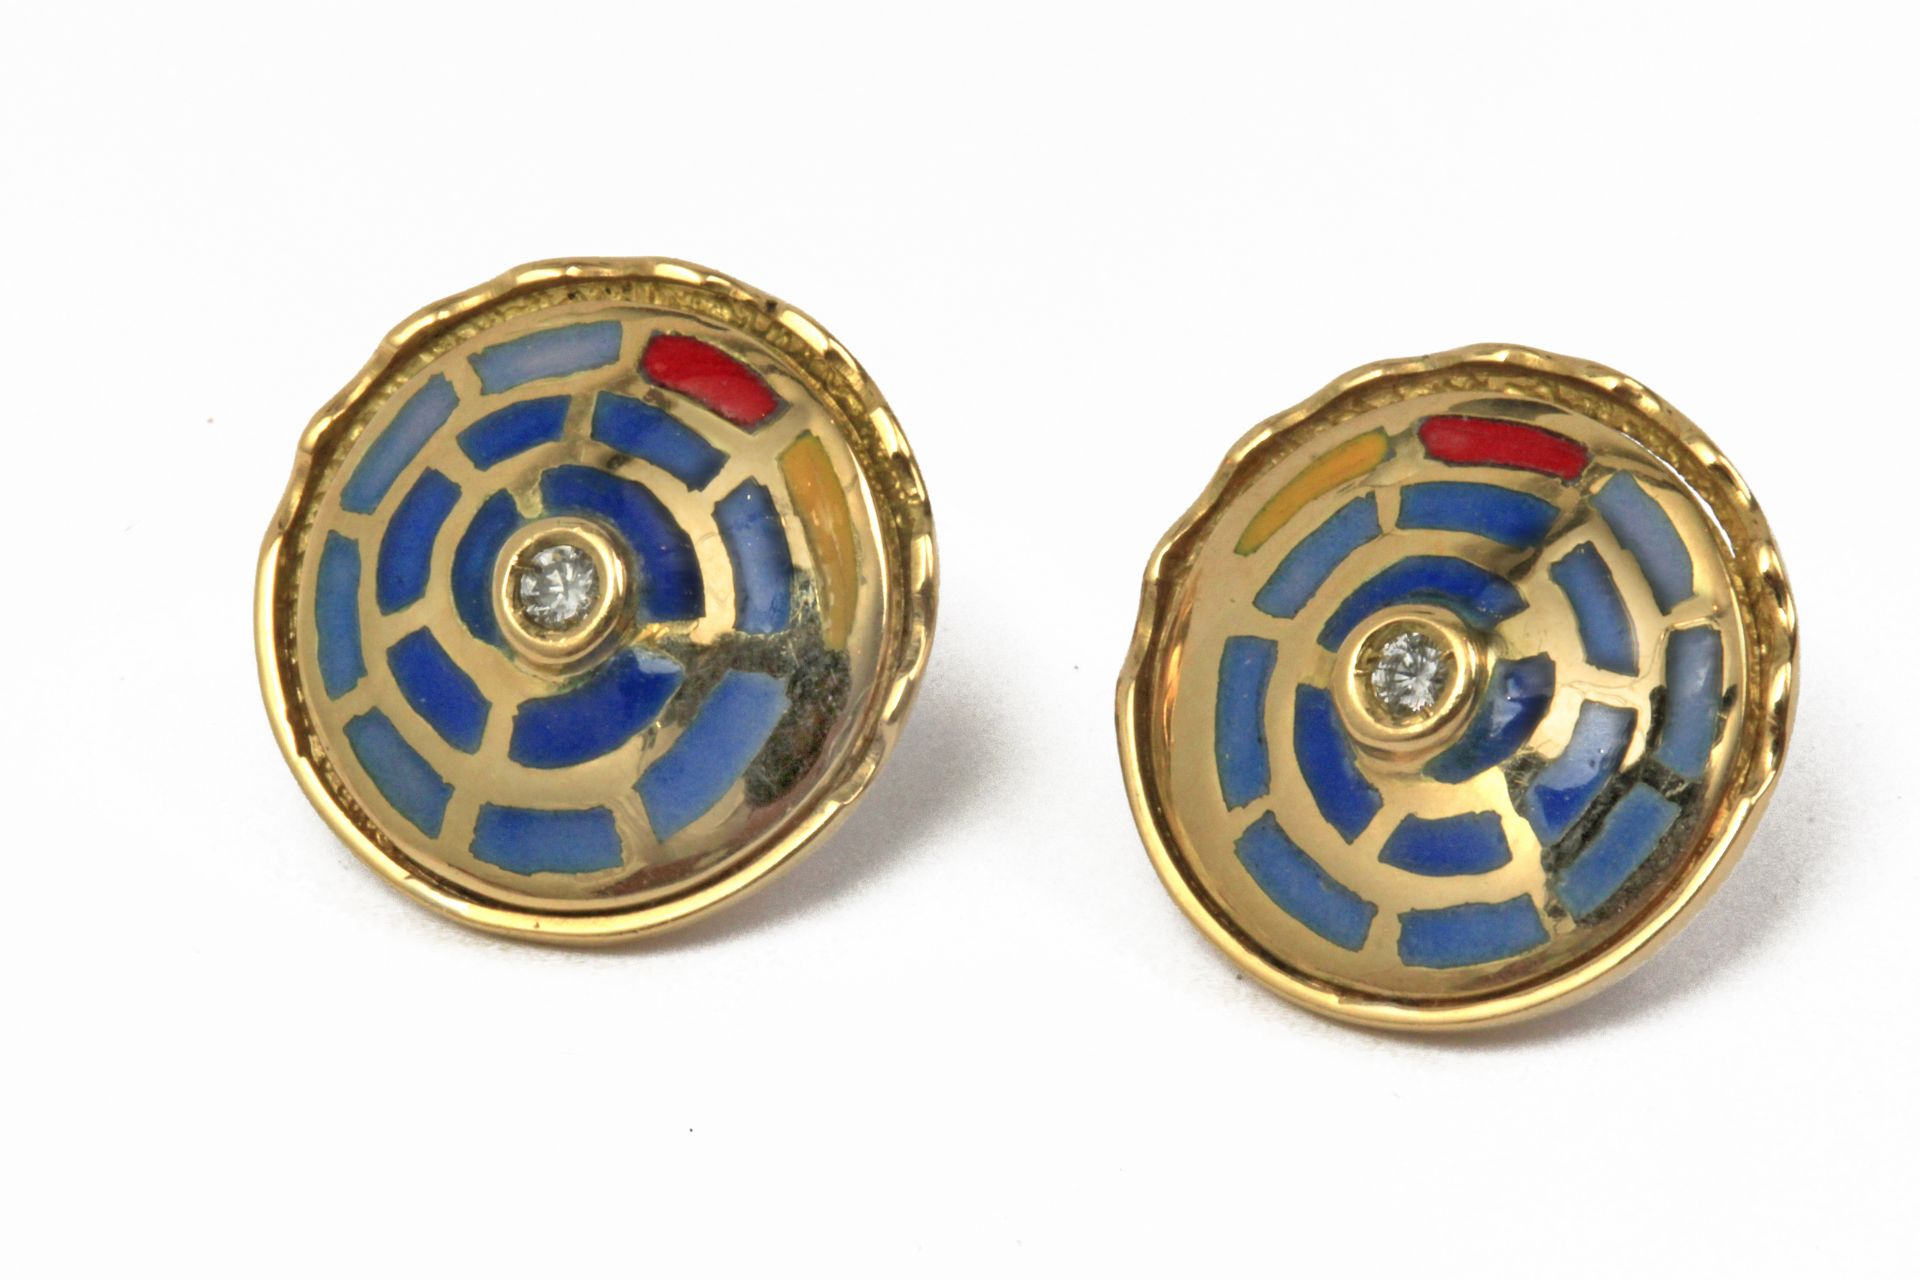 A pair of design earrings with an 18 k. yellow gold setting, brilliant cut diamonds and enamel